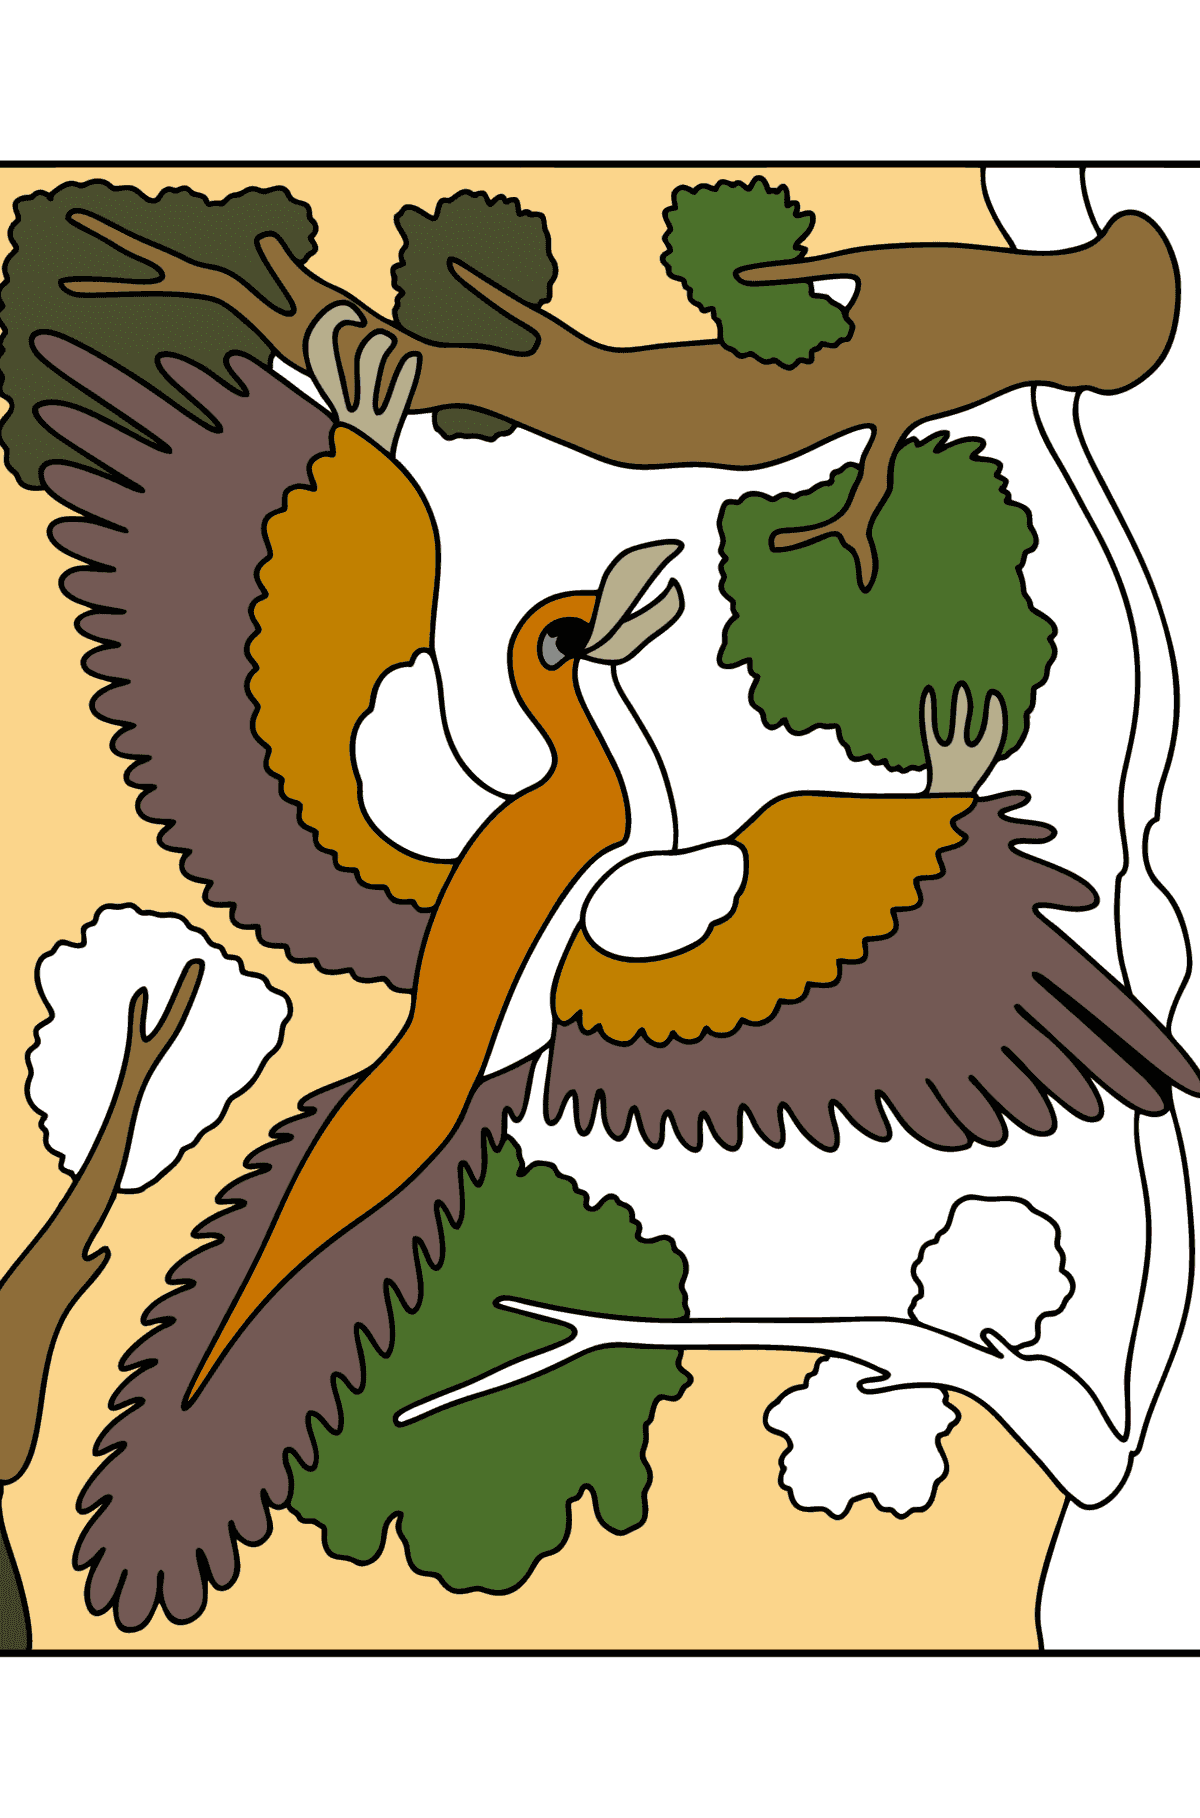 Archeopteryx coloring page - Coloring Pages for Kids